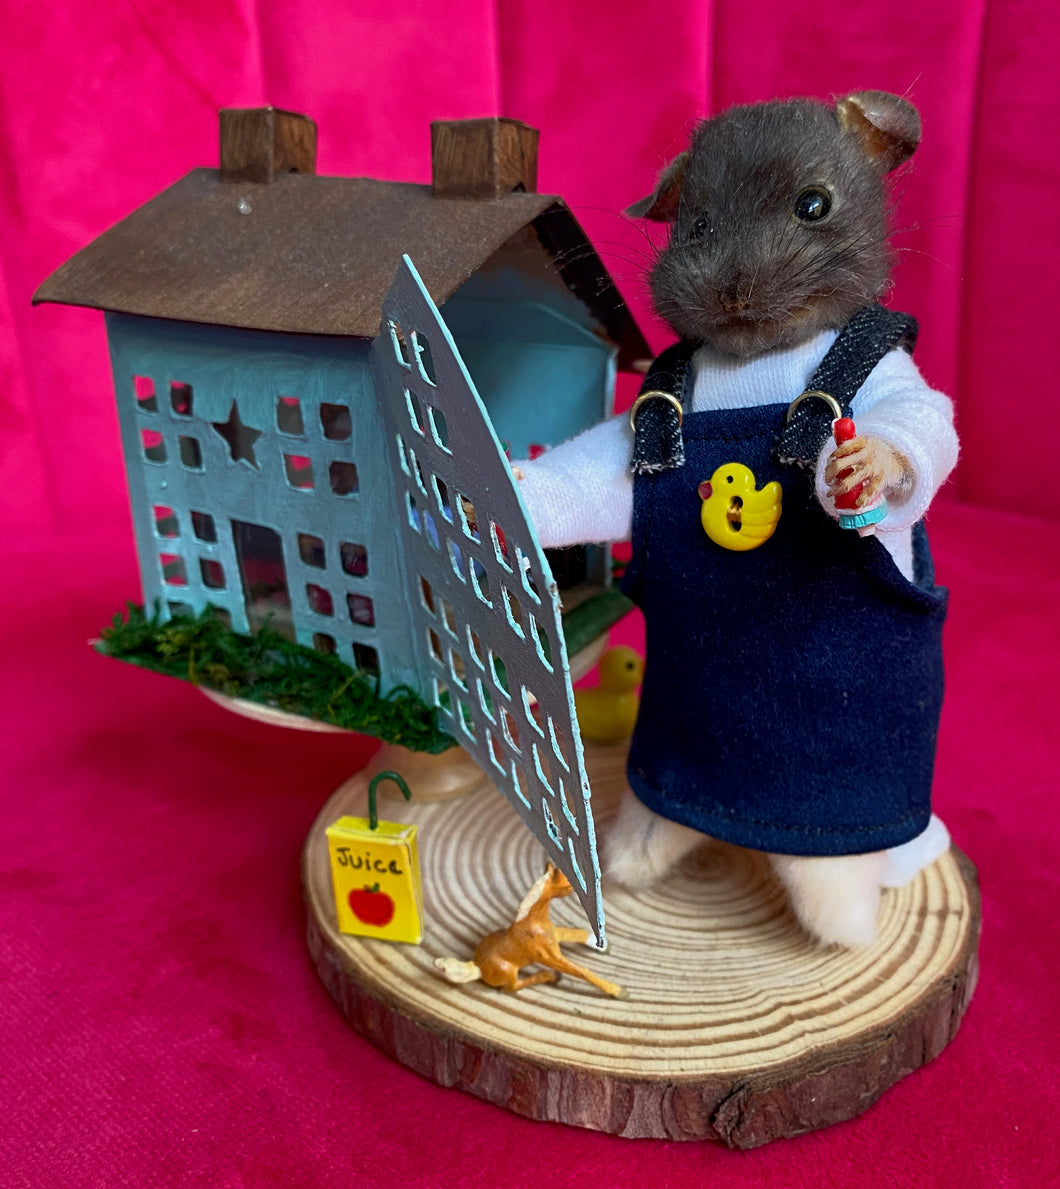 Anthropomorphic Taxidermy Rat with Doll House made by Connie Dayoff